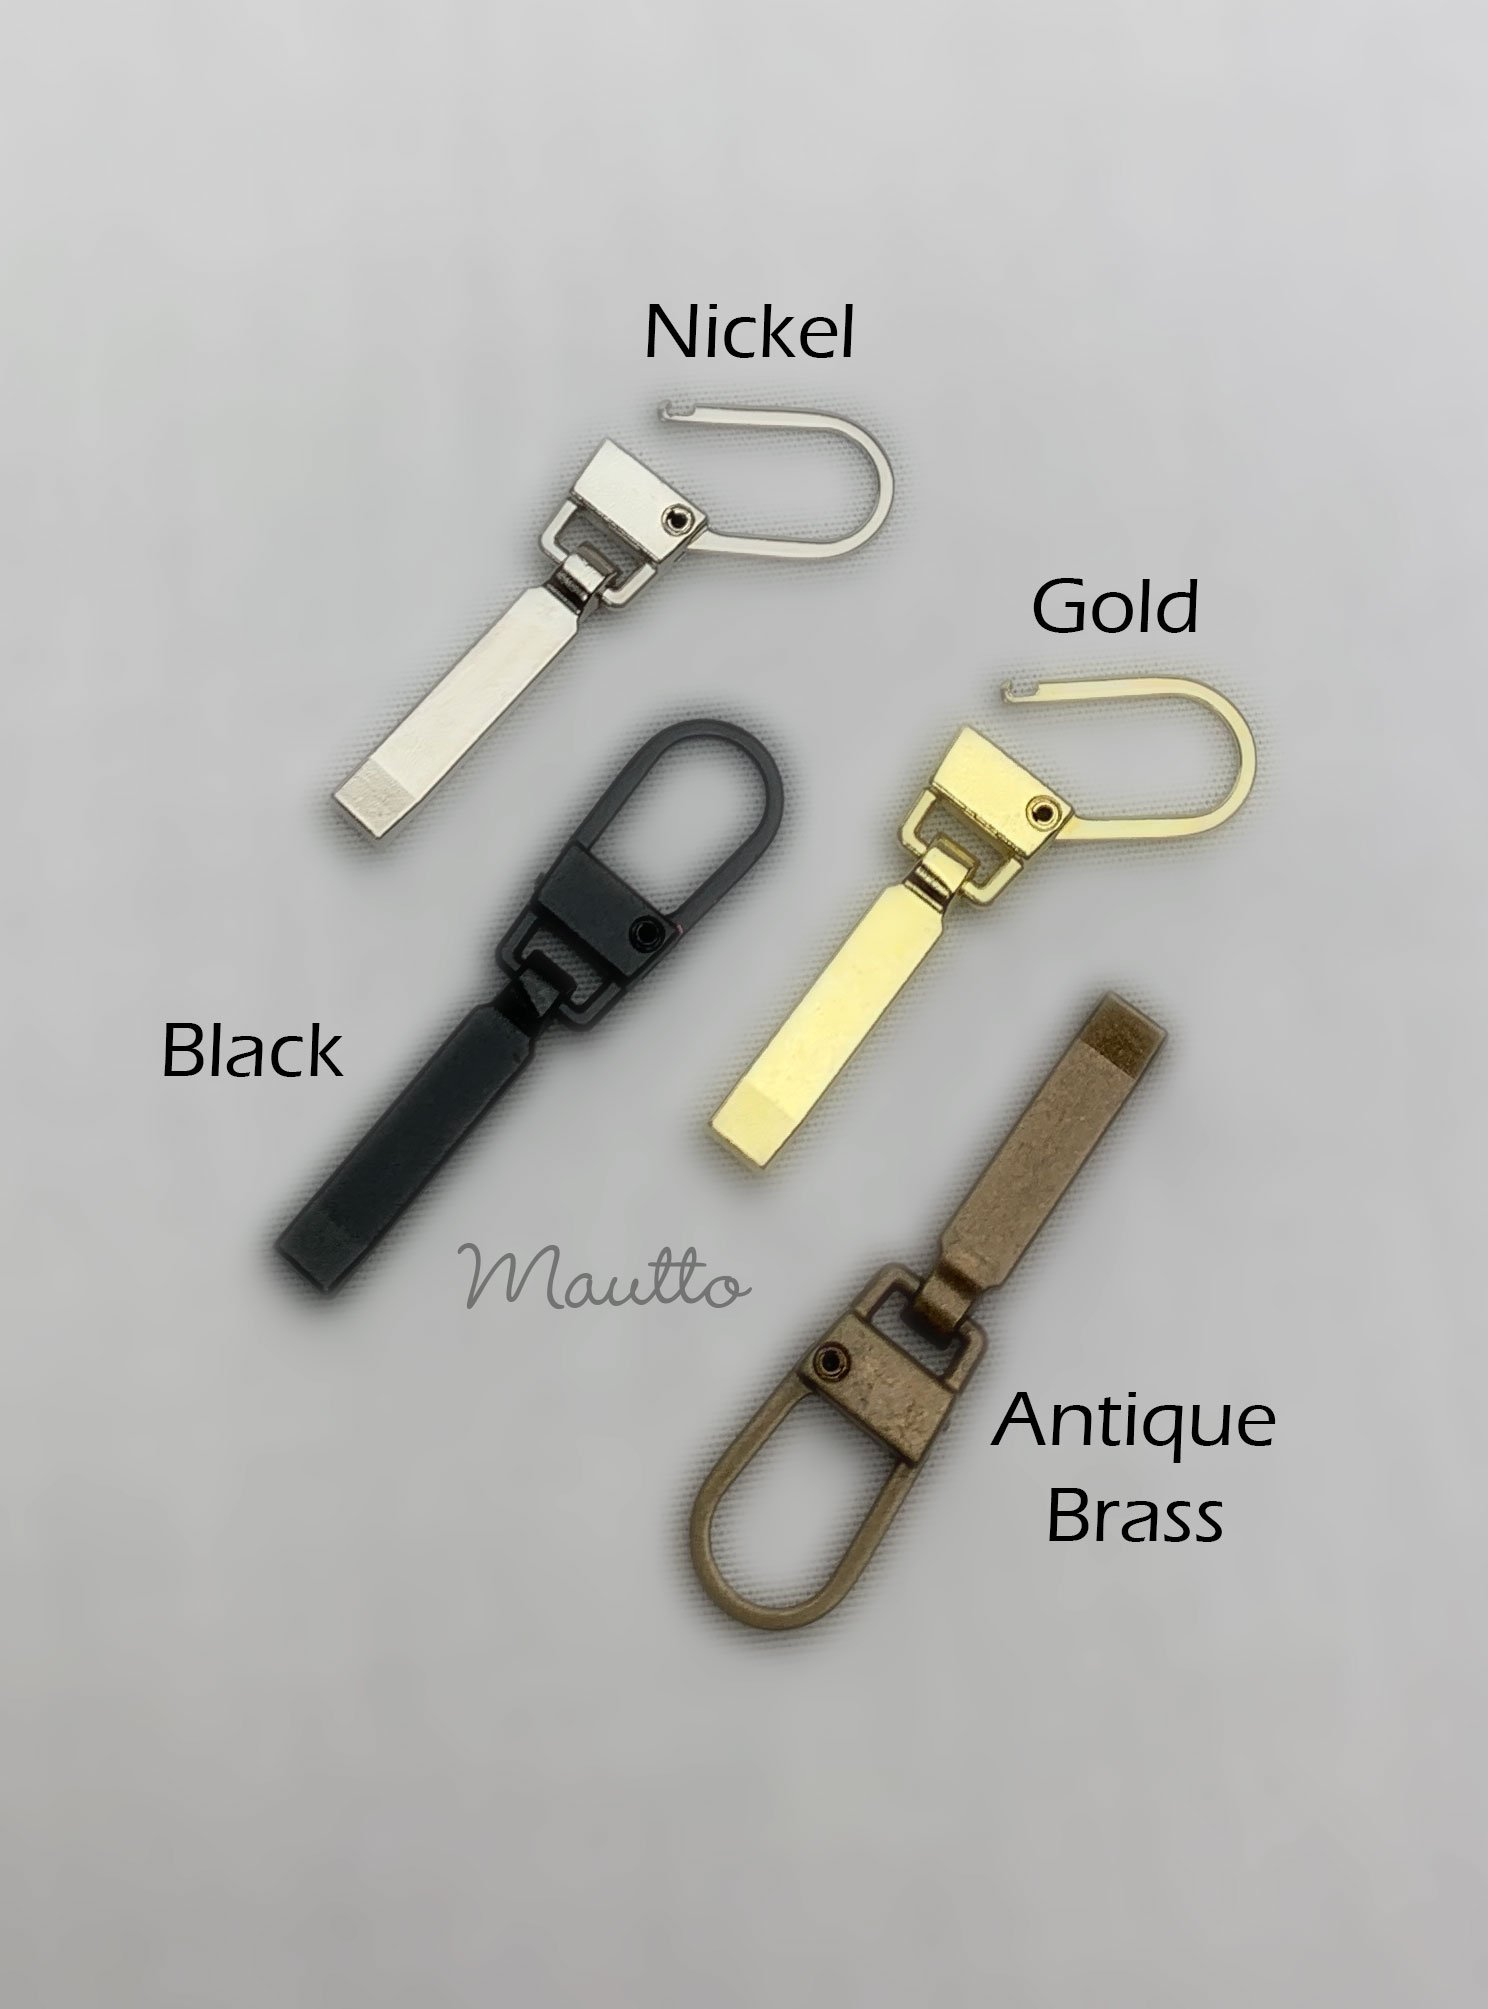 How To Replace A Zipper Pull - www.inf-inet.com